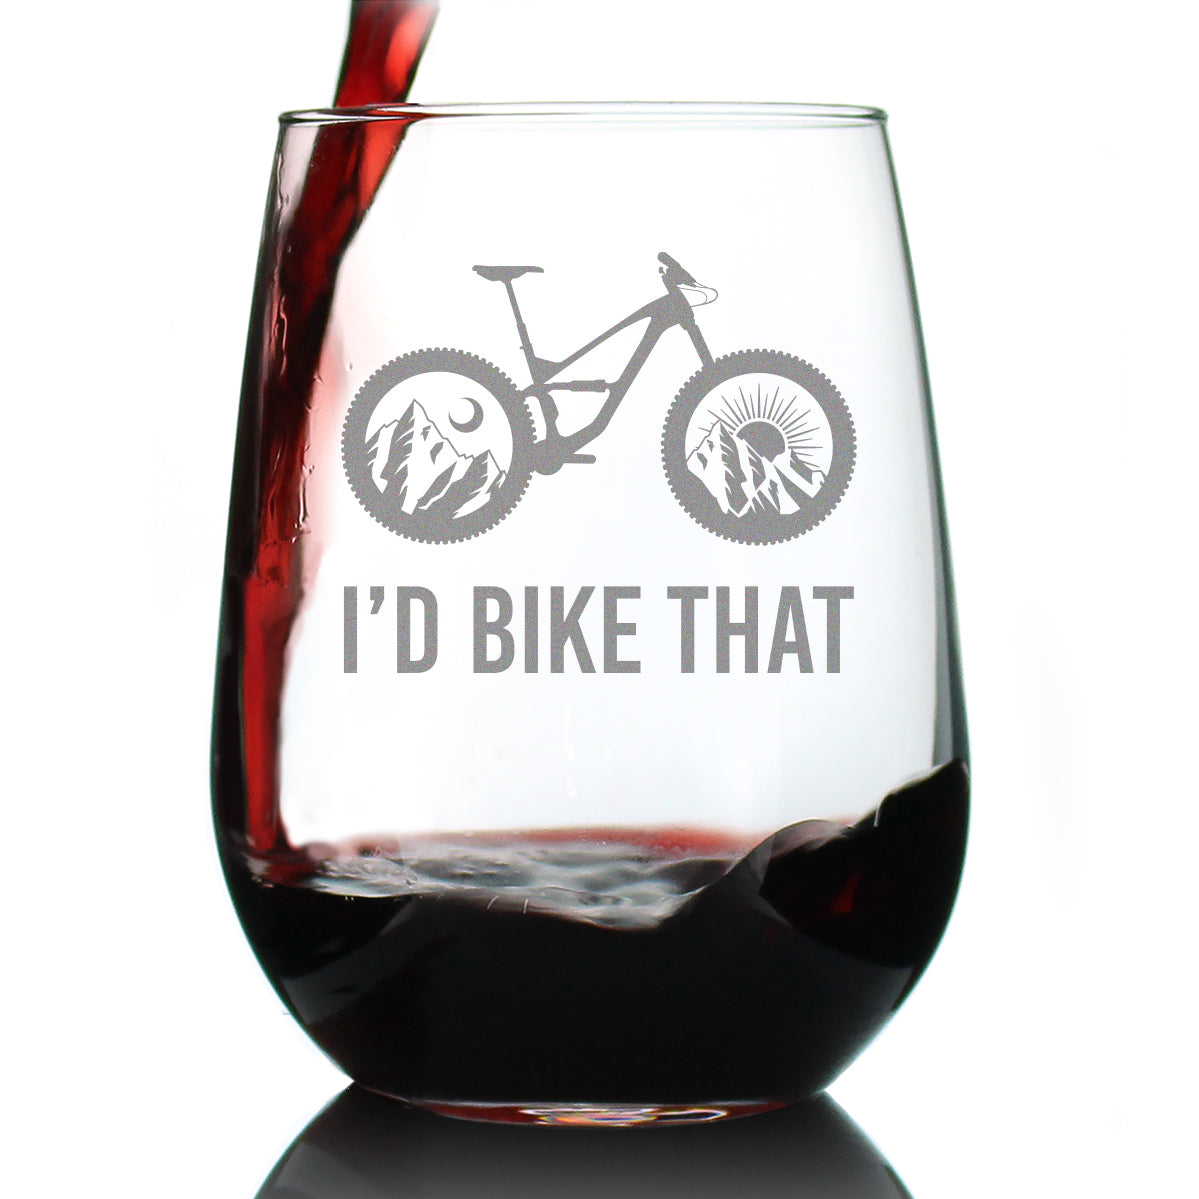 I&#39;d Bike That - Stemless Wine Glass - Bicycle Themed Decor and Gifts for Outdoor Lovers - Large 17 Oz Glasses